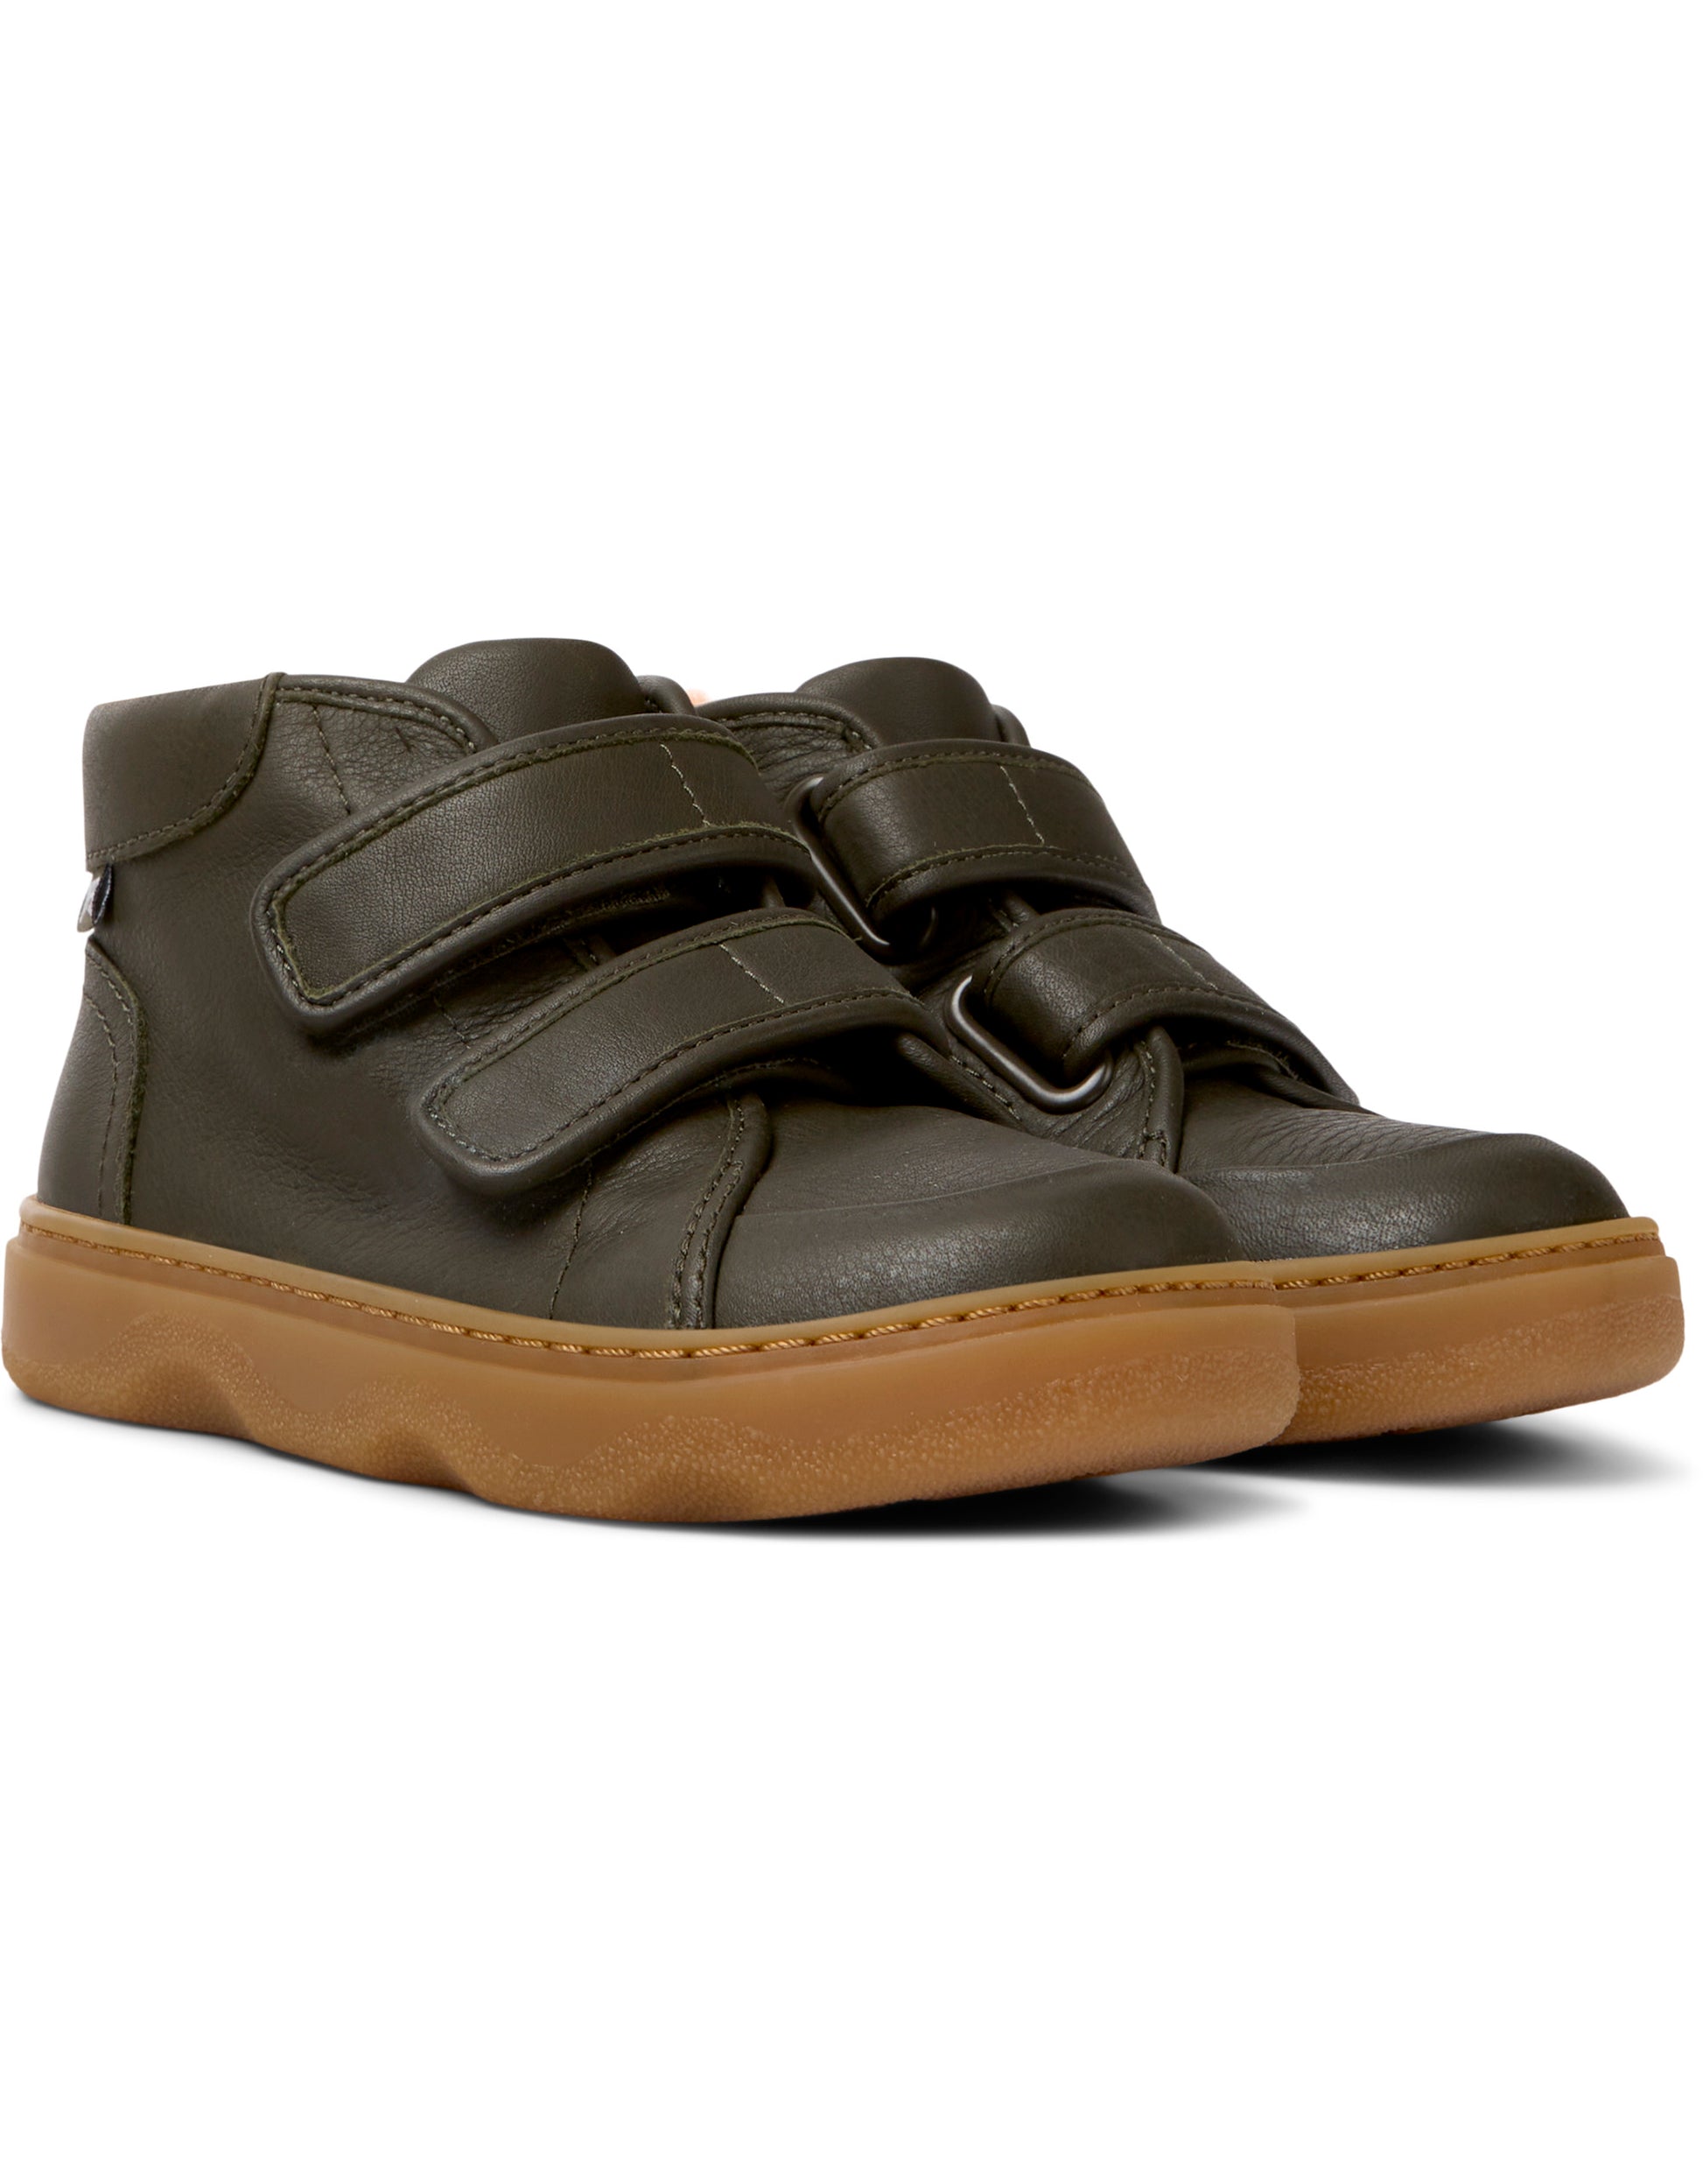 A pair of boys casual ankle boots by Camper, style K900303-004 in brown leather with double velcro fastening. Angled view.